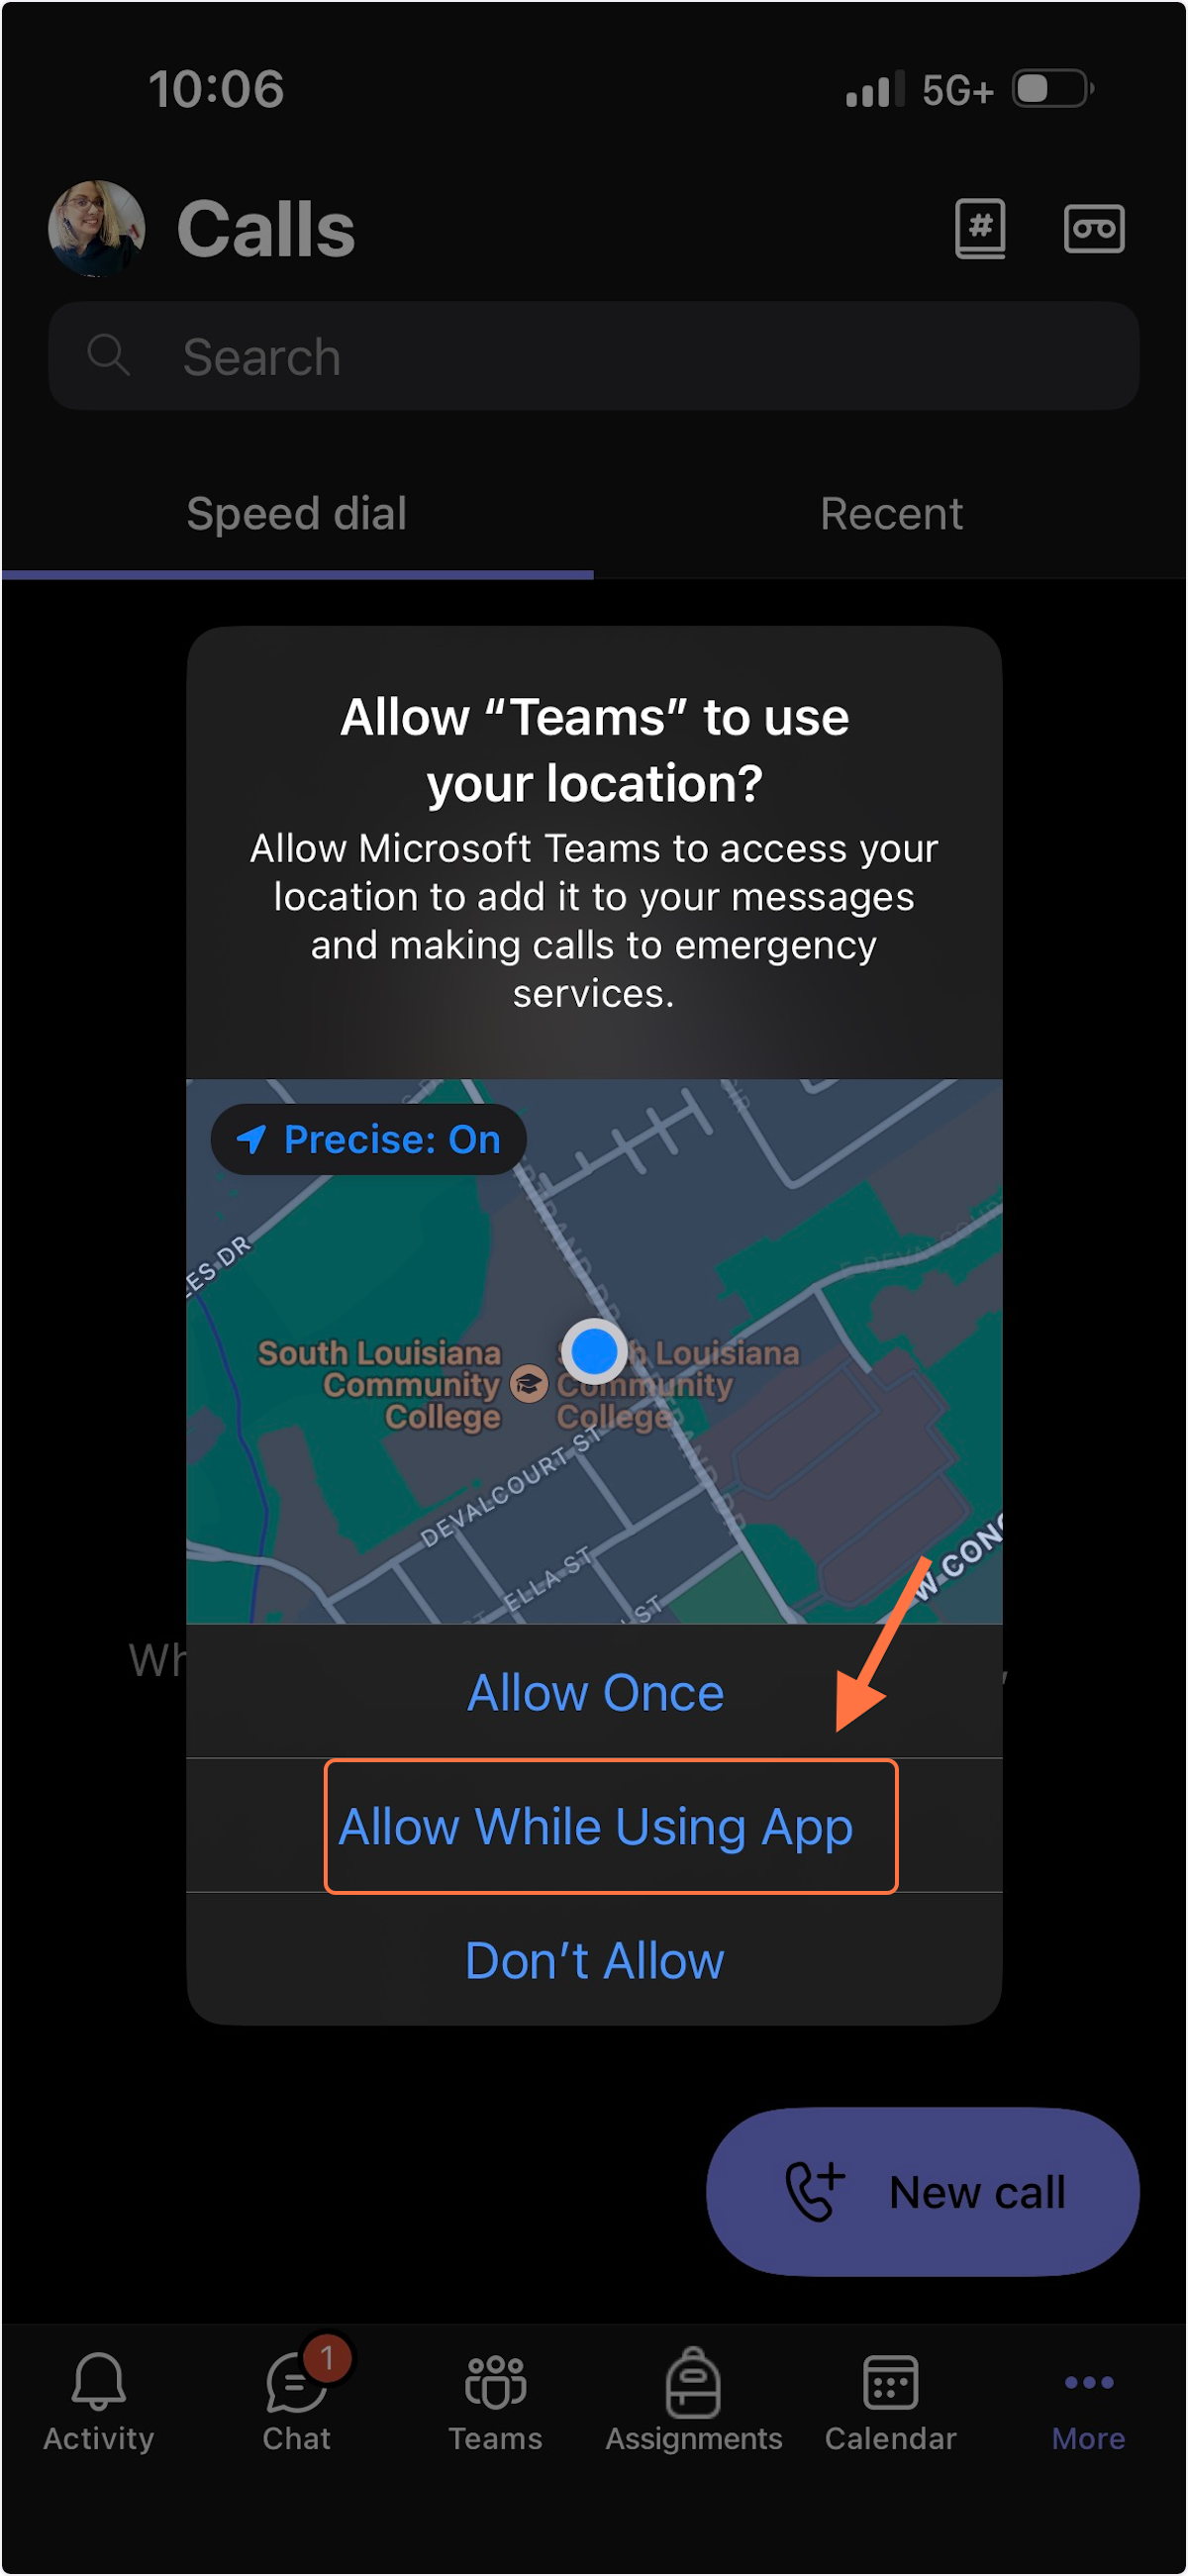 You will get a pop-up asking if Teams can use your location.  Select "Allow While Using App" or "Always" (depends on phone type).